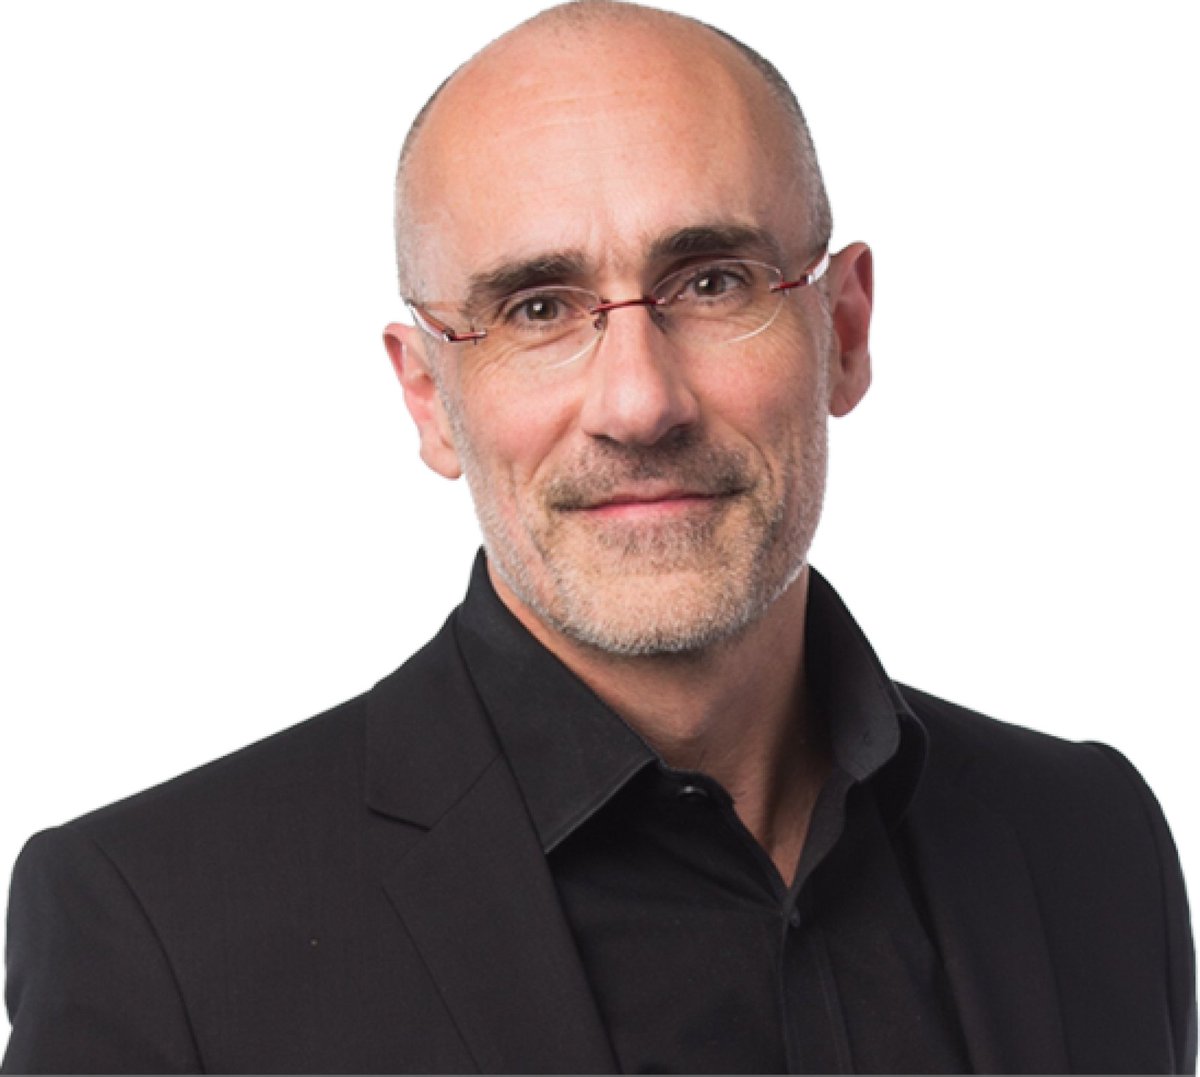 #FacultyTuesday: affiliate @arthurbrooks teaches nonprofit management and #leadership @Kennedy_School and @HarvardHBS. Brooks is a social scientist, the author of 11 books, and the “How to Build a Life” columnist for @TheAtlantic. #centerforcities cities.harvard.edu/about/person/a…